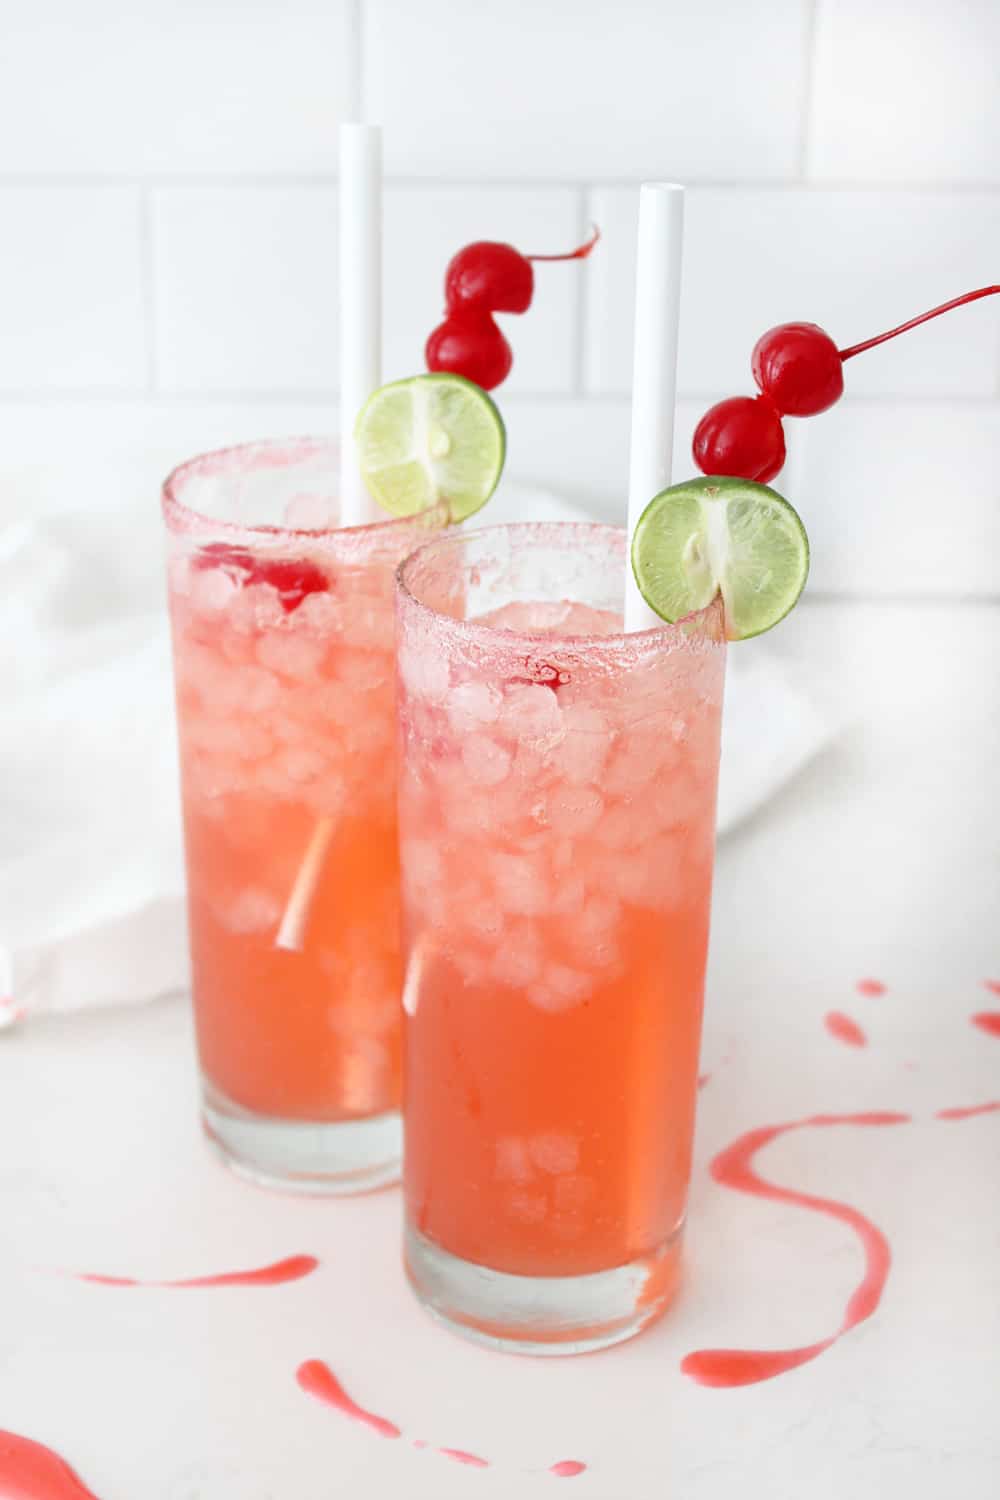 Two glasses of cherry limeade with cherries and limes on drink picks.